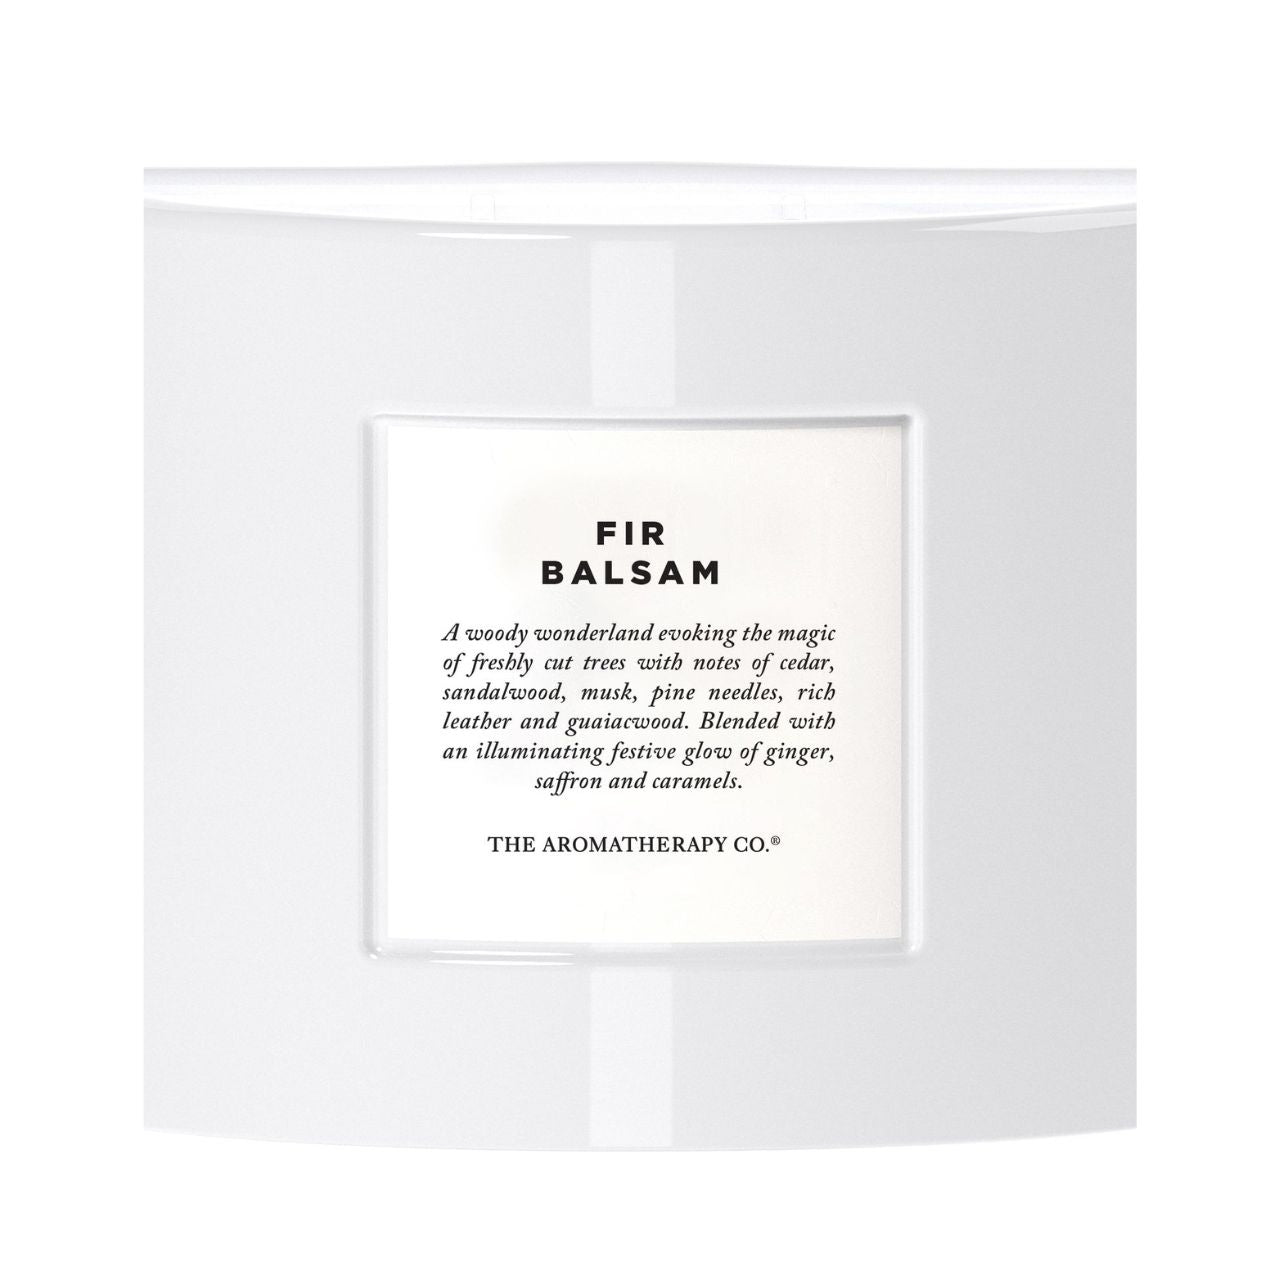 Christmas Blend 280gm Candle - Fir Balsam  A soy candle from THE AROMATHERAPY CO.  This new addition from the Blend range offers an array of sumptuous fragrances simultaneously.